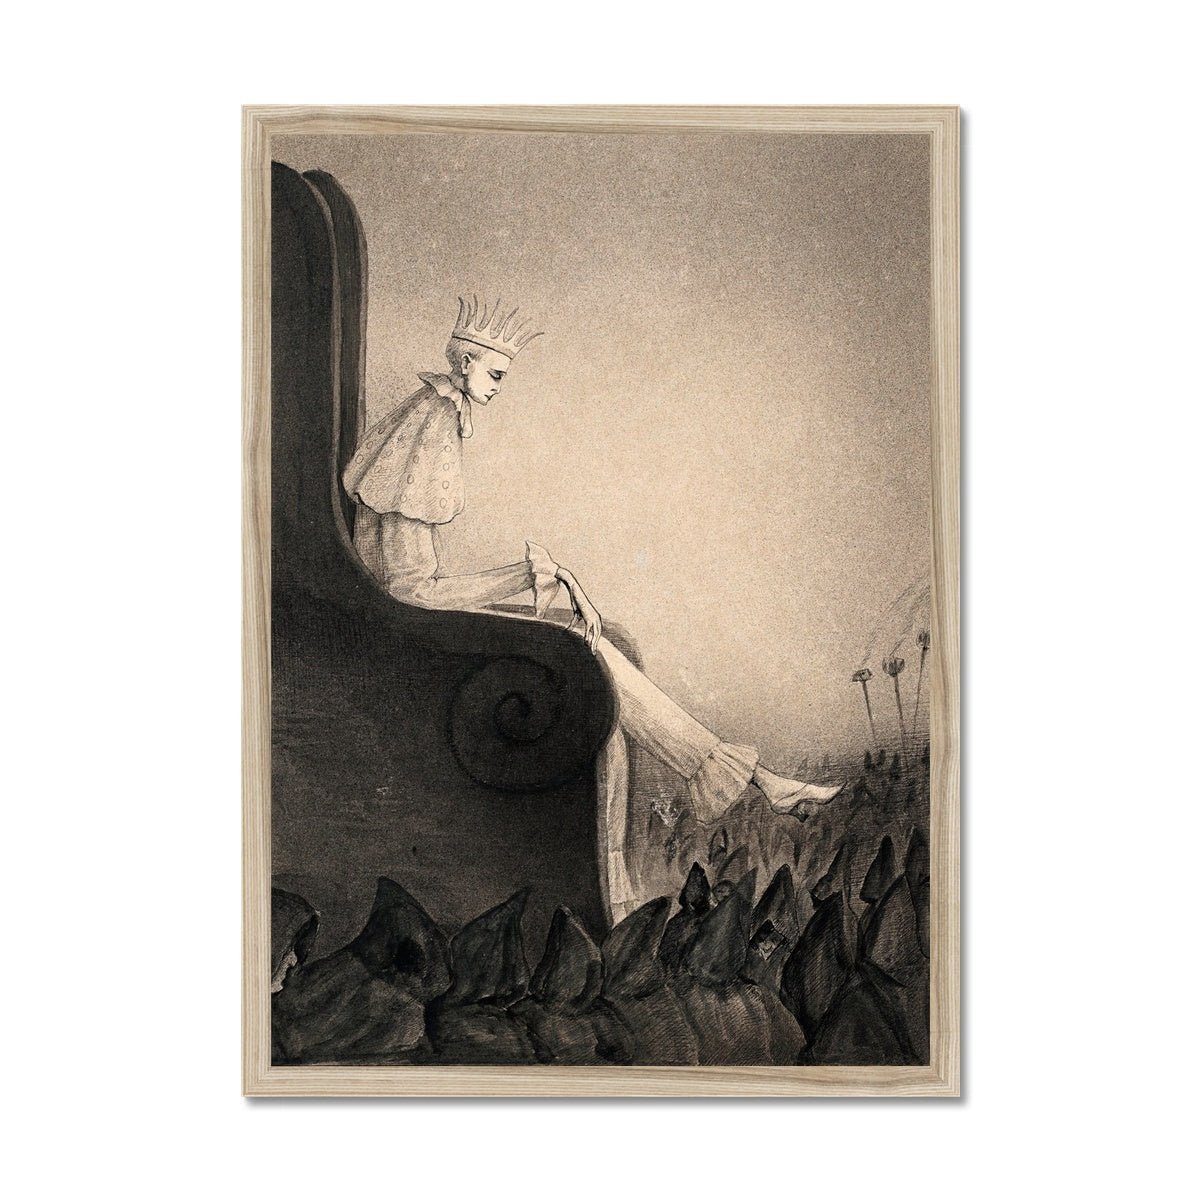 Framed Print 6"x8" / Natural Frame Alfred Kubin: The Last King, Symbolist (Anti Capitalist) Surreal Wall Art Antique Gothic Decor Dark Wiccan Pagan Occult Framed Art Print